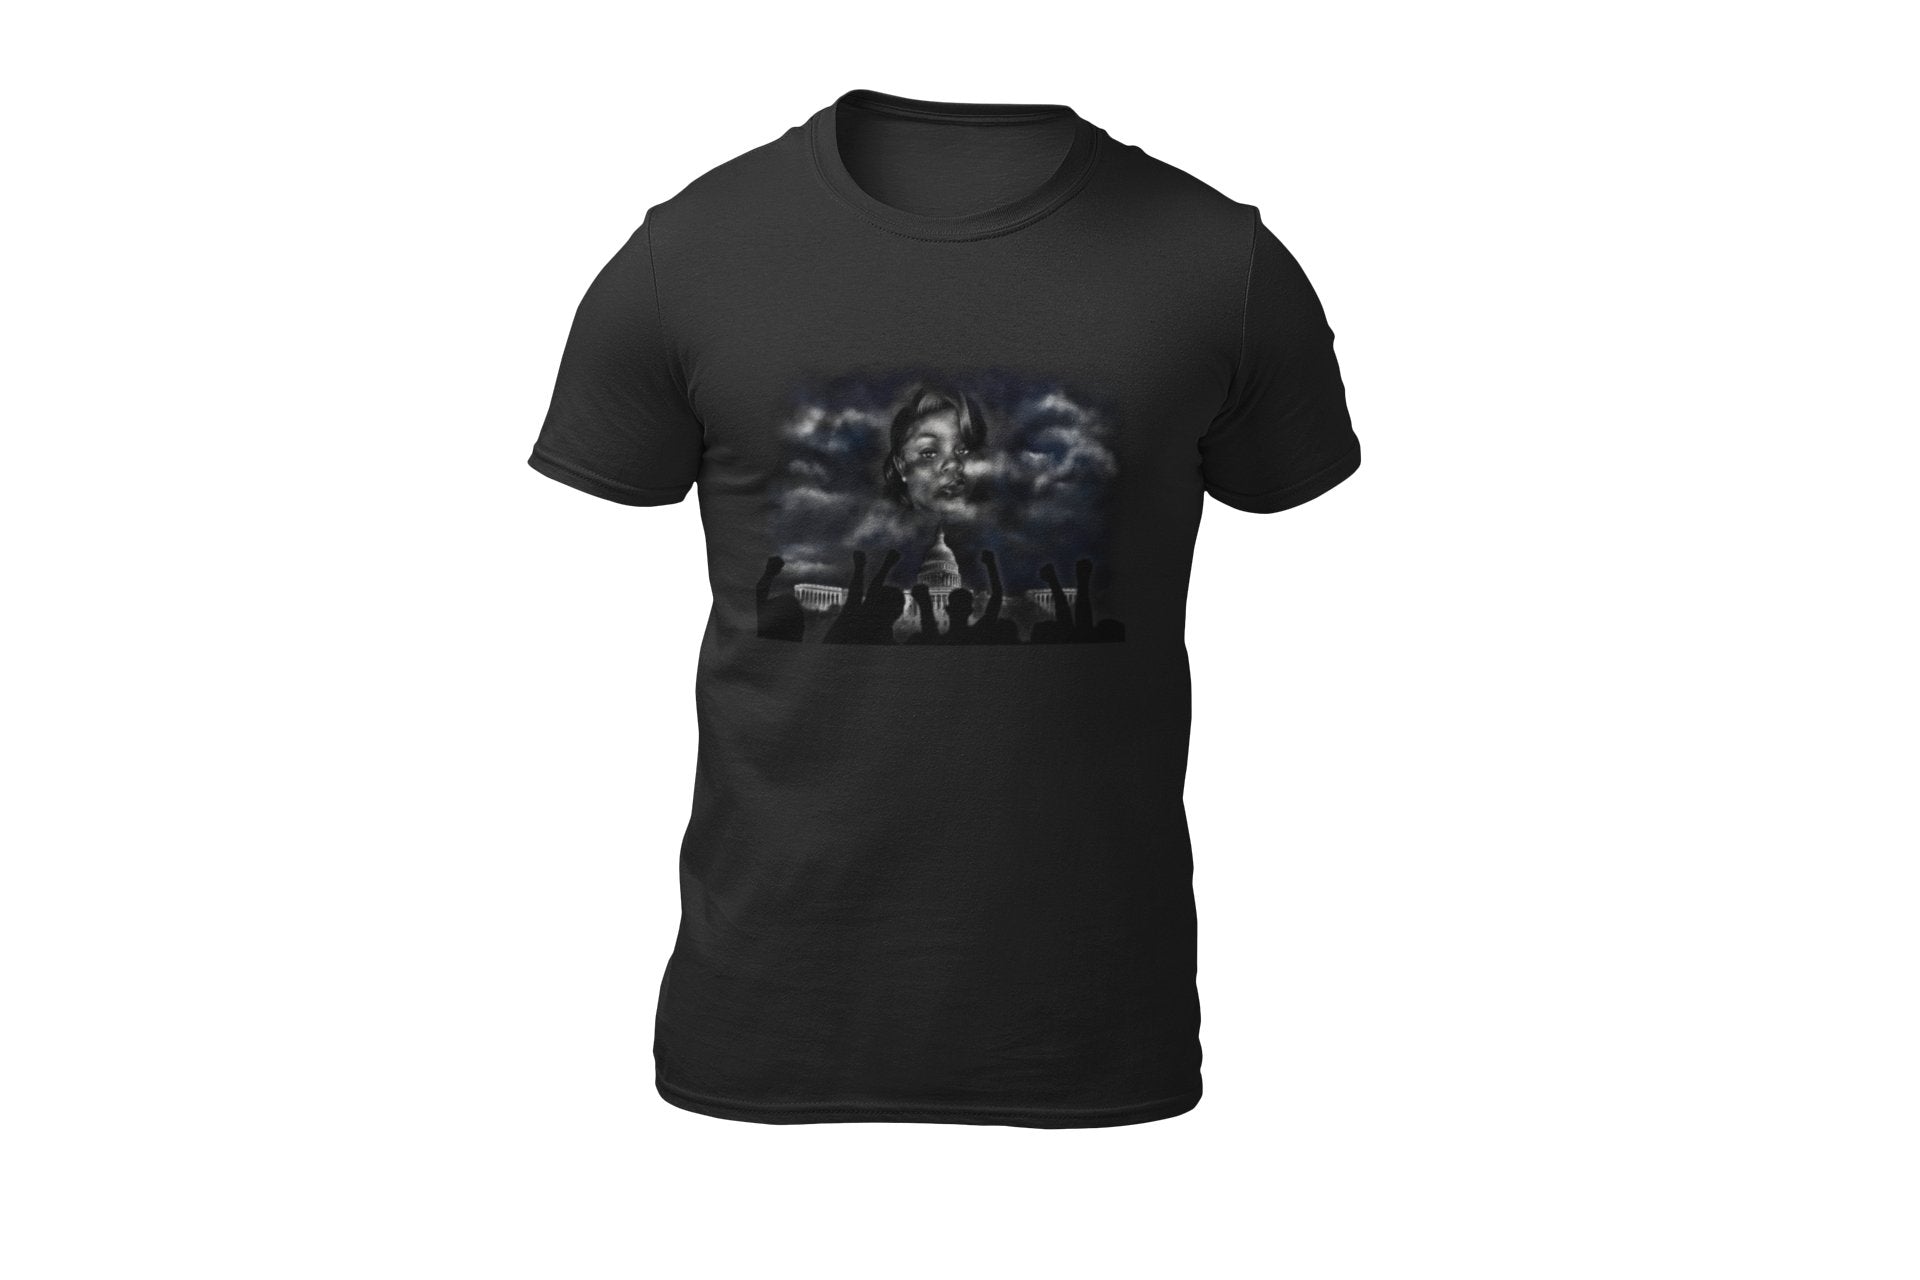 Breonna Taylor T-Shirt | Say Her Name | Unisex Black T-Shirt - Androo's Art